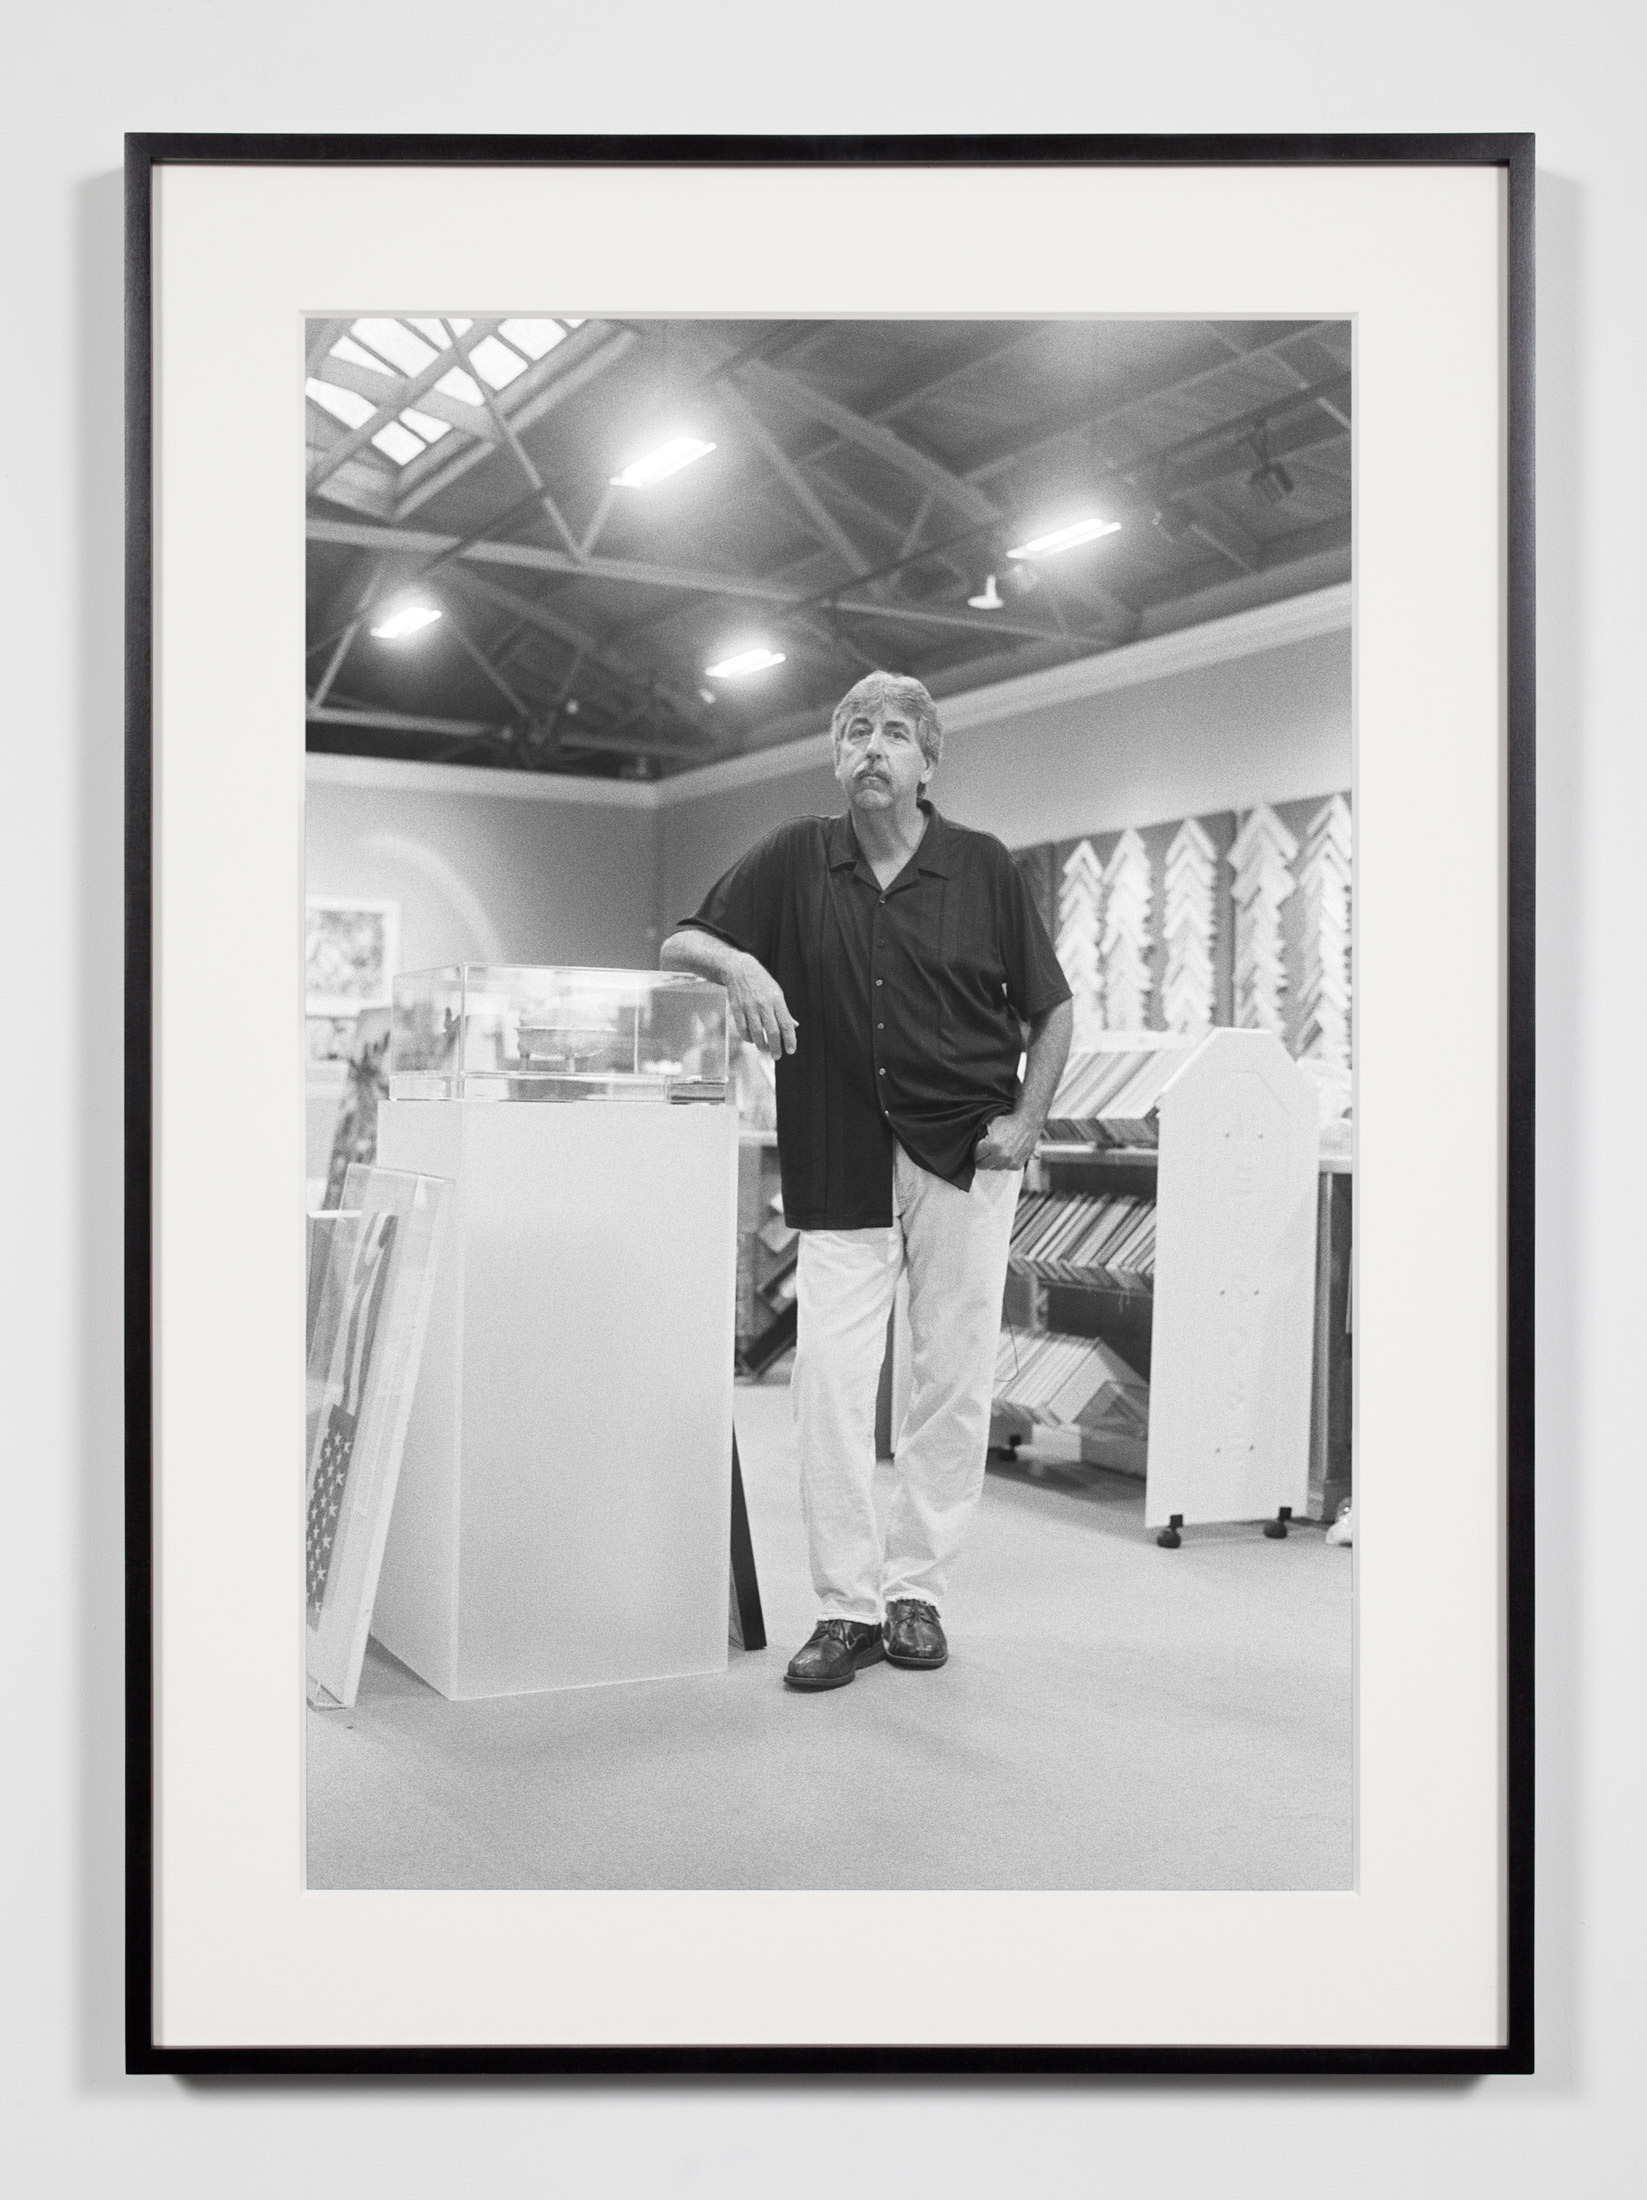   Master Framer, Los Angeles, California, June 20, 2009    2011   Epson Ultrachrome K3 archival ink jet print on Hahnemühle Photo Rag paper  36 3/8 x 26 3/8 inches   Industrial Portraits, 2008–     